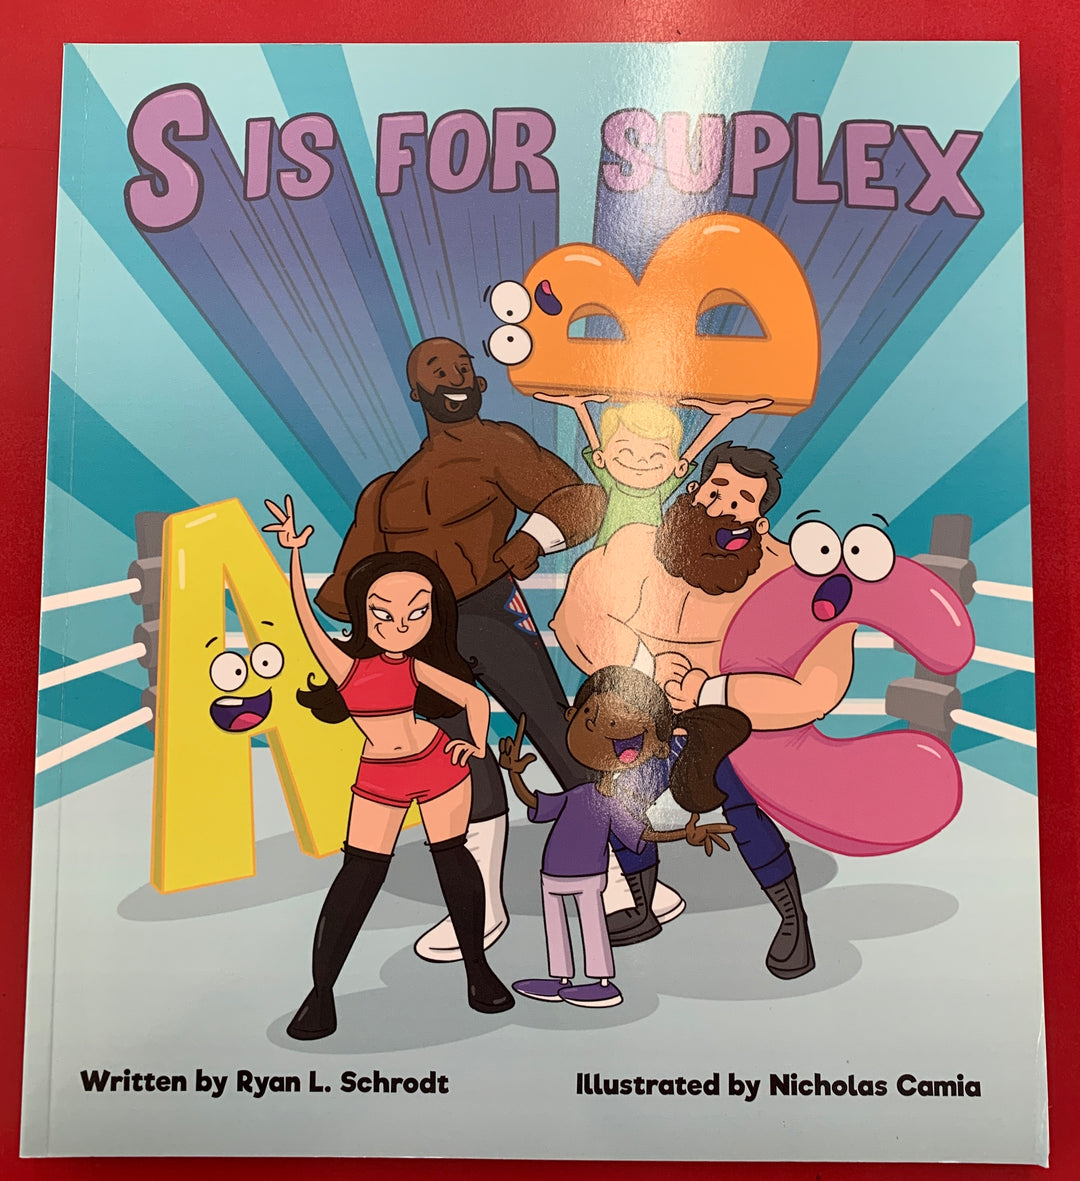 S is for Suplex